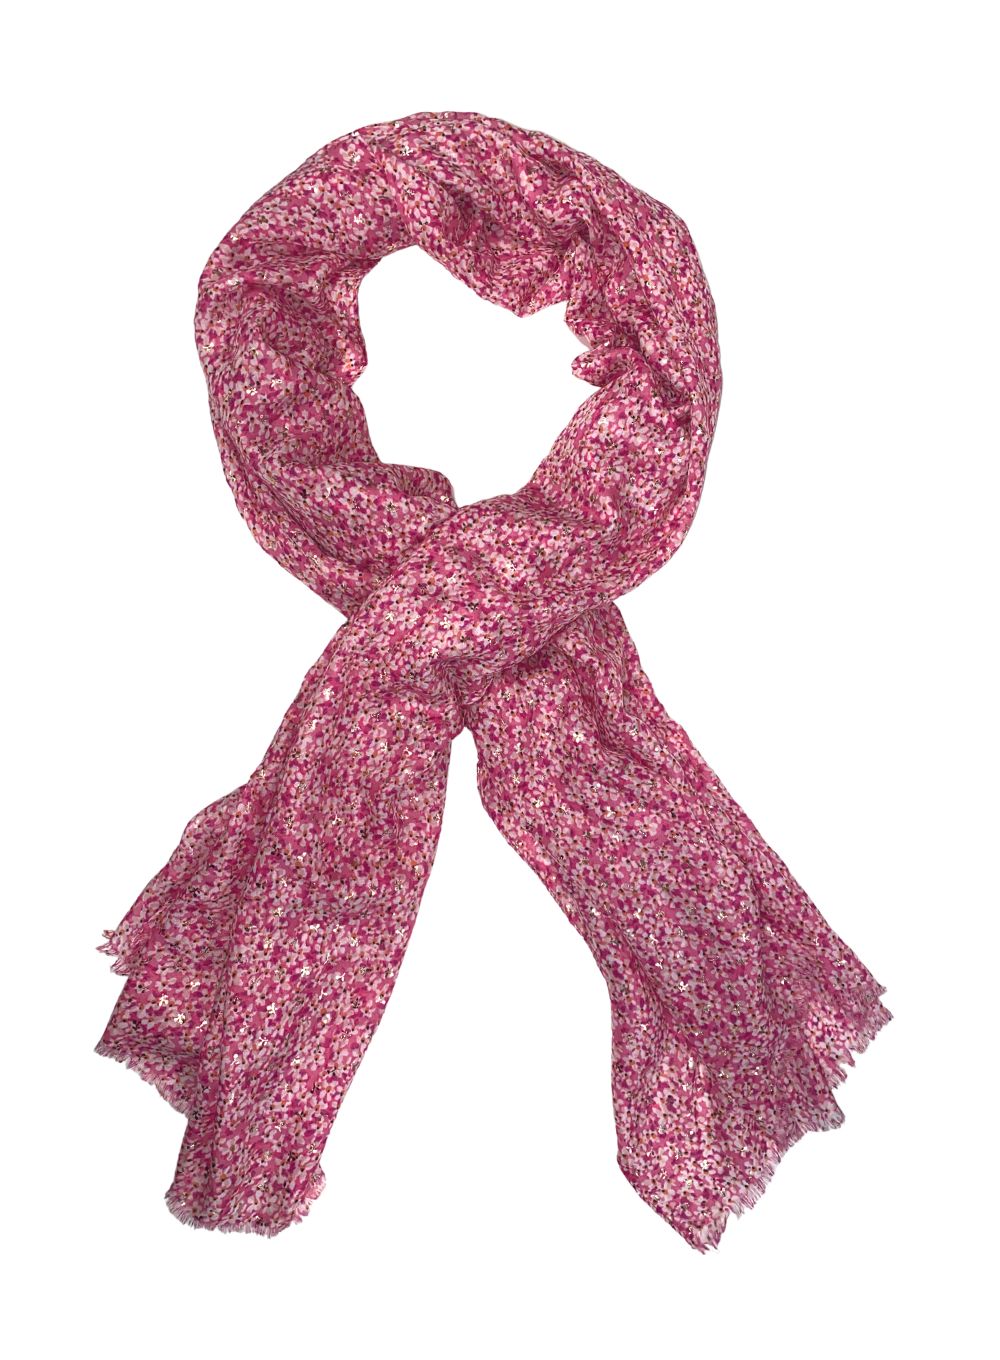 ONE-OF-A-KIND PARISIAN SCARF | Floral Print Scarf